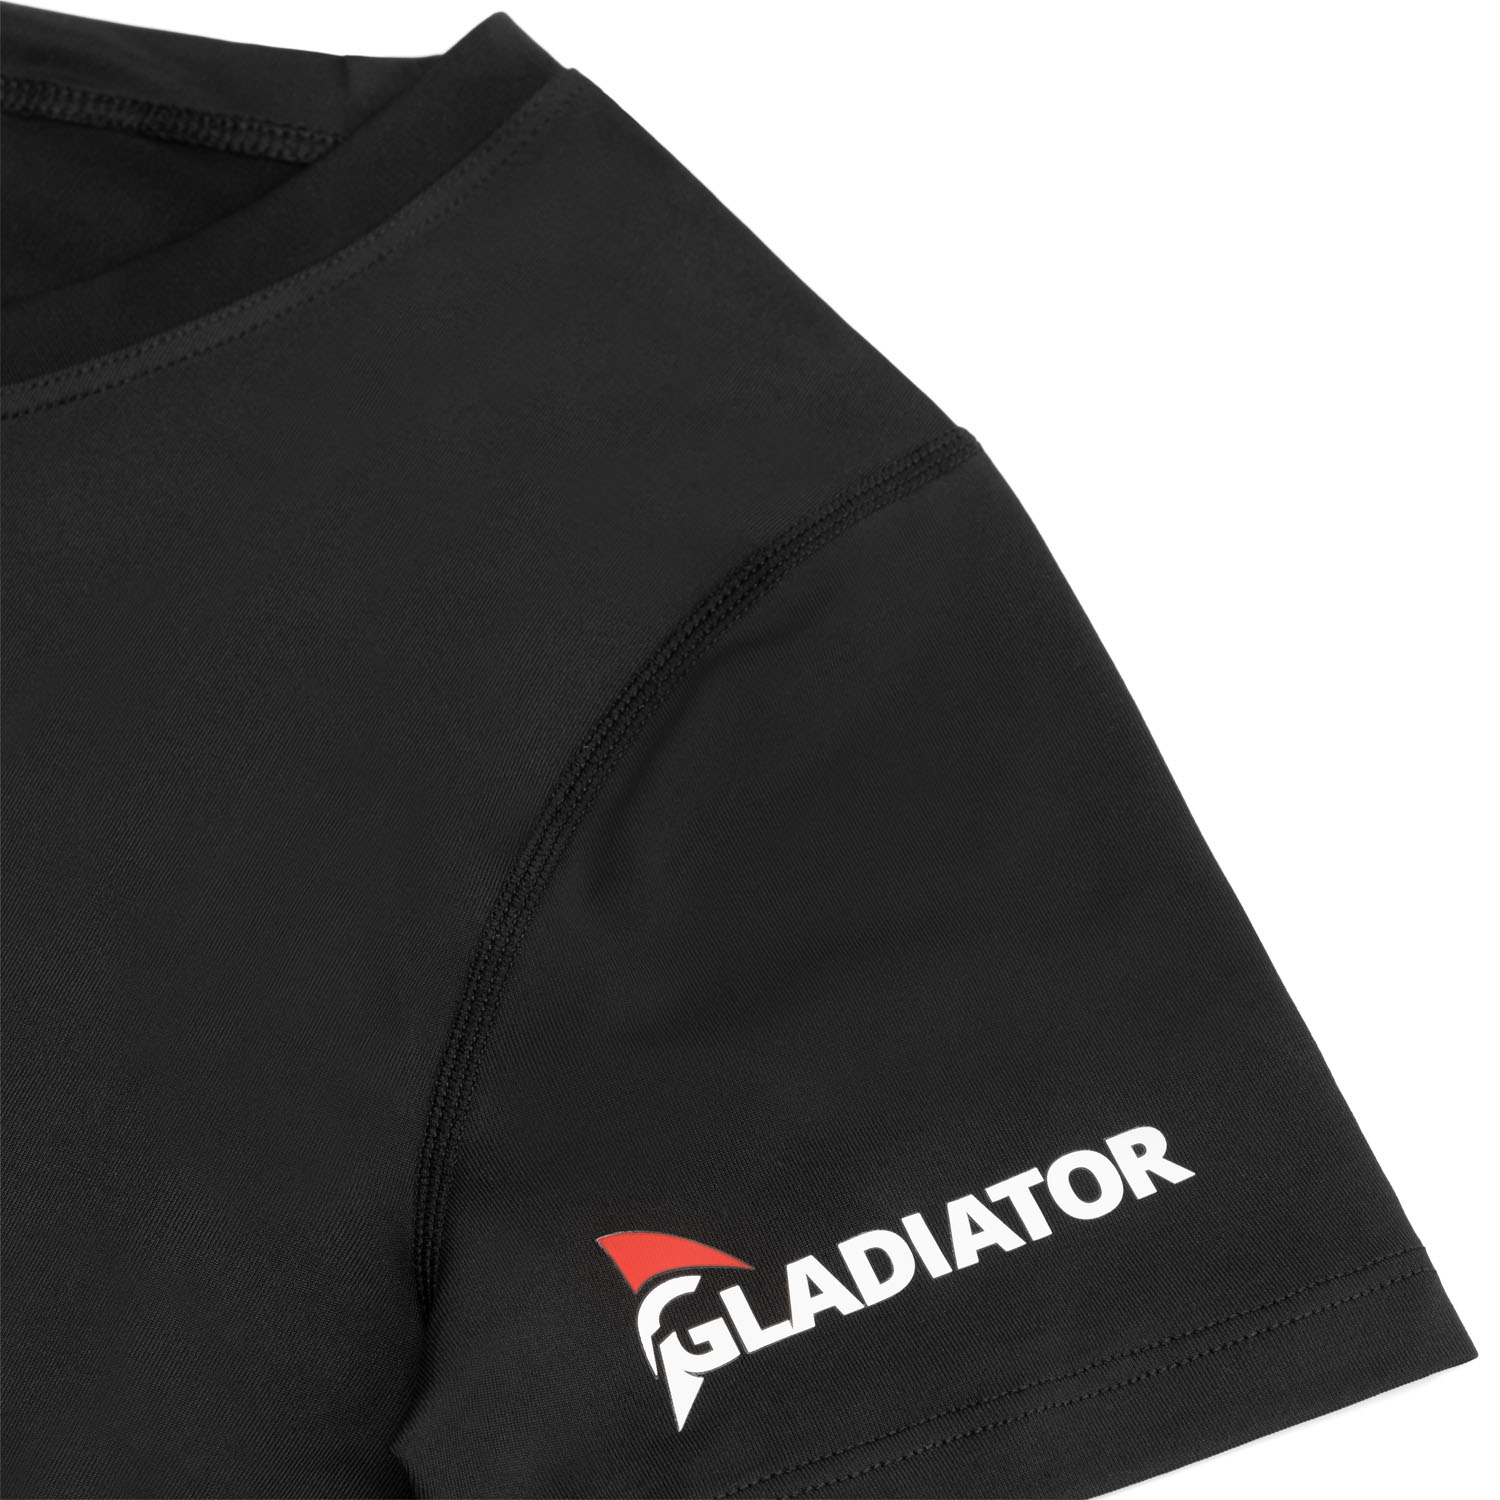 gladiator sports compression shirt for women in black detail photo logo